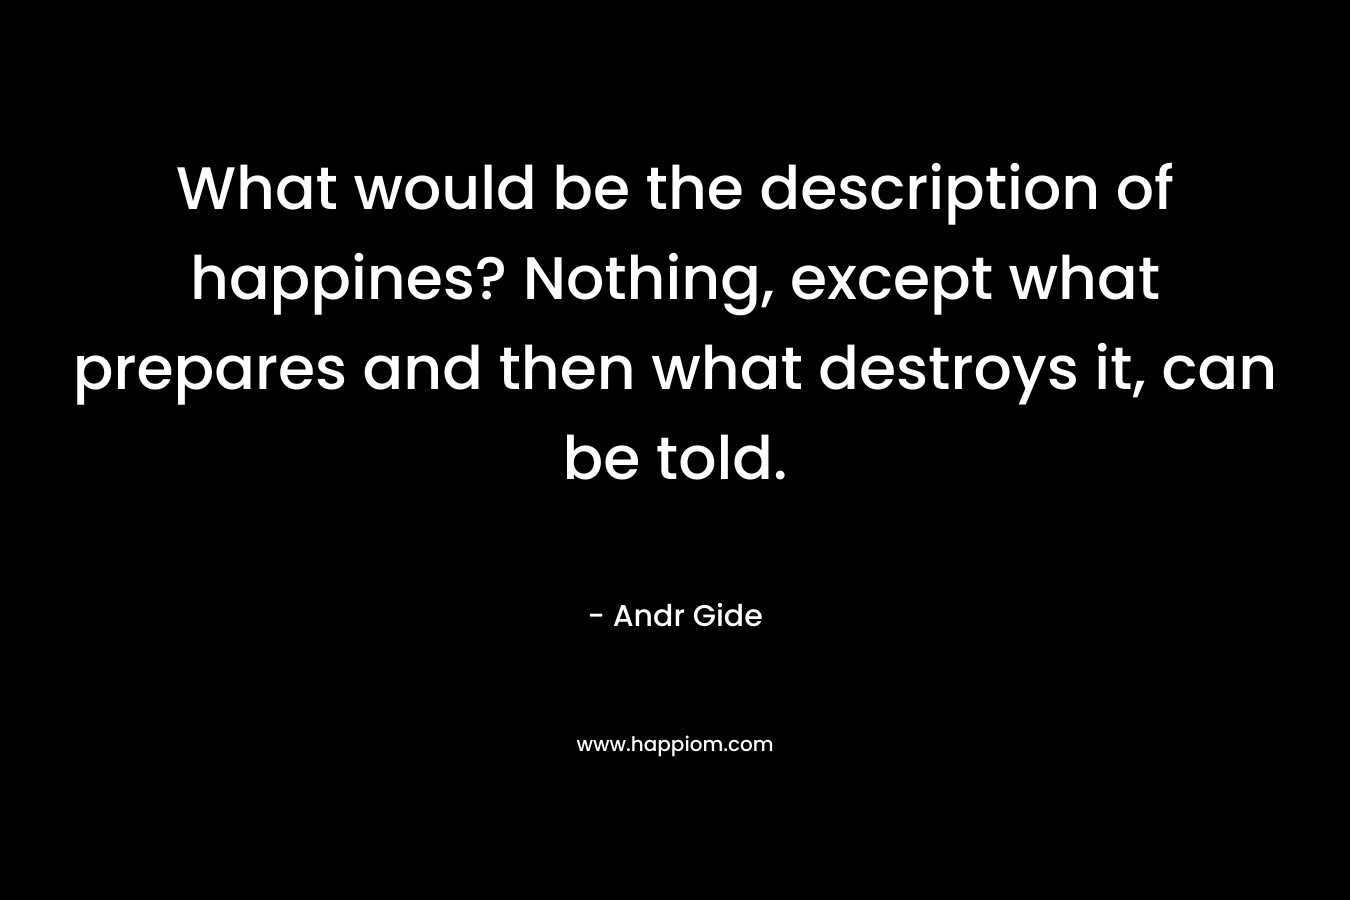 What would be the description of happines? Nothing, except what prepares and then what destroys it, can be told.